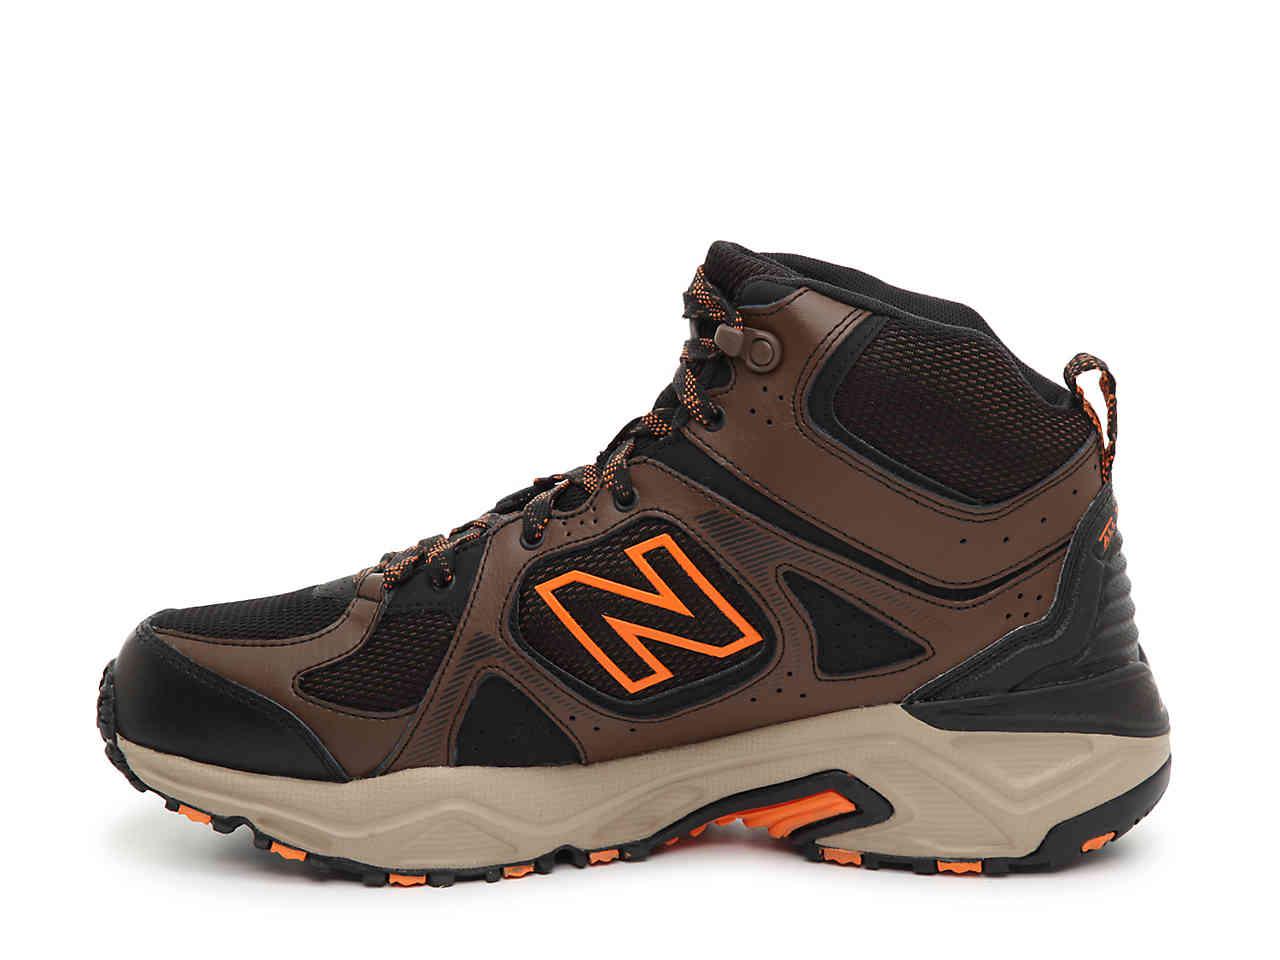 New Balance Leather 481 V3 Trail Running Shoe in Brown for Men - Lyst